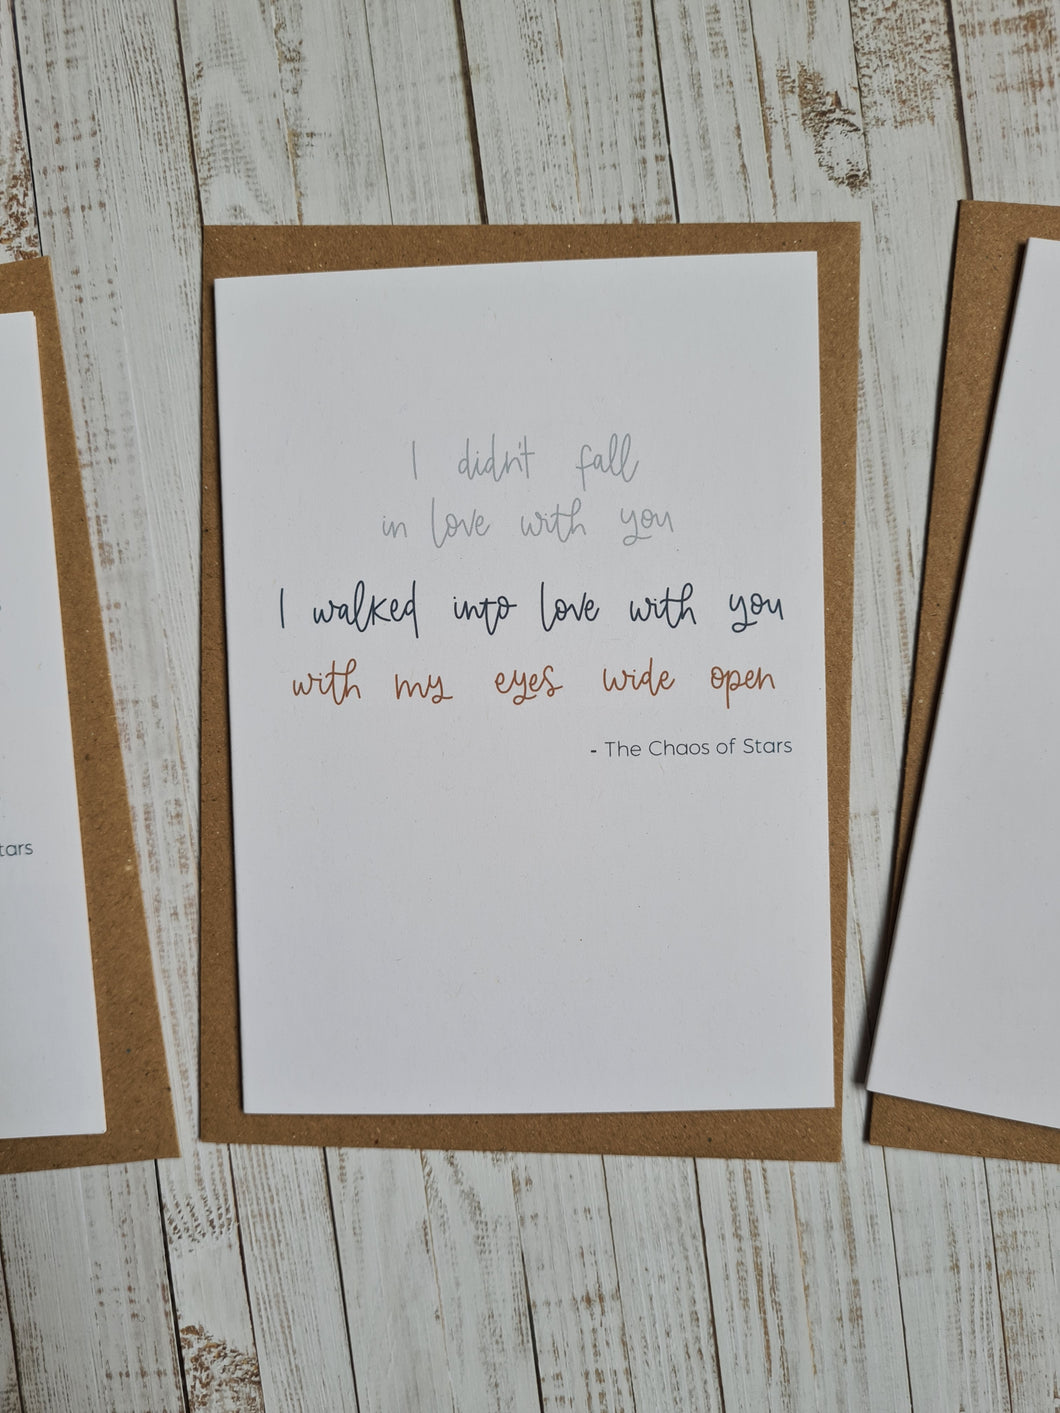 ‘I Didn’t Fall in Love With You…’ Romantic Quote Greeting Card